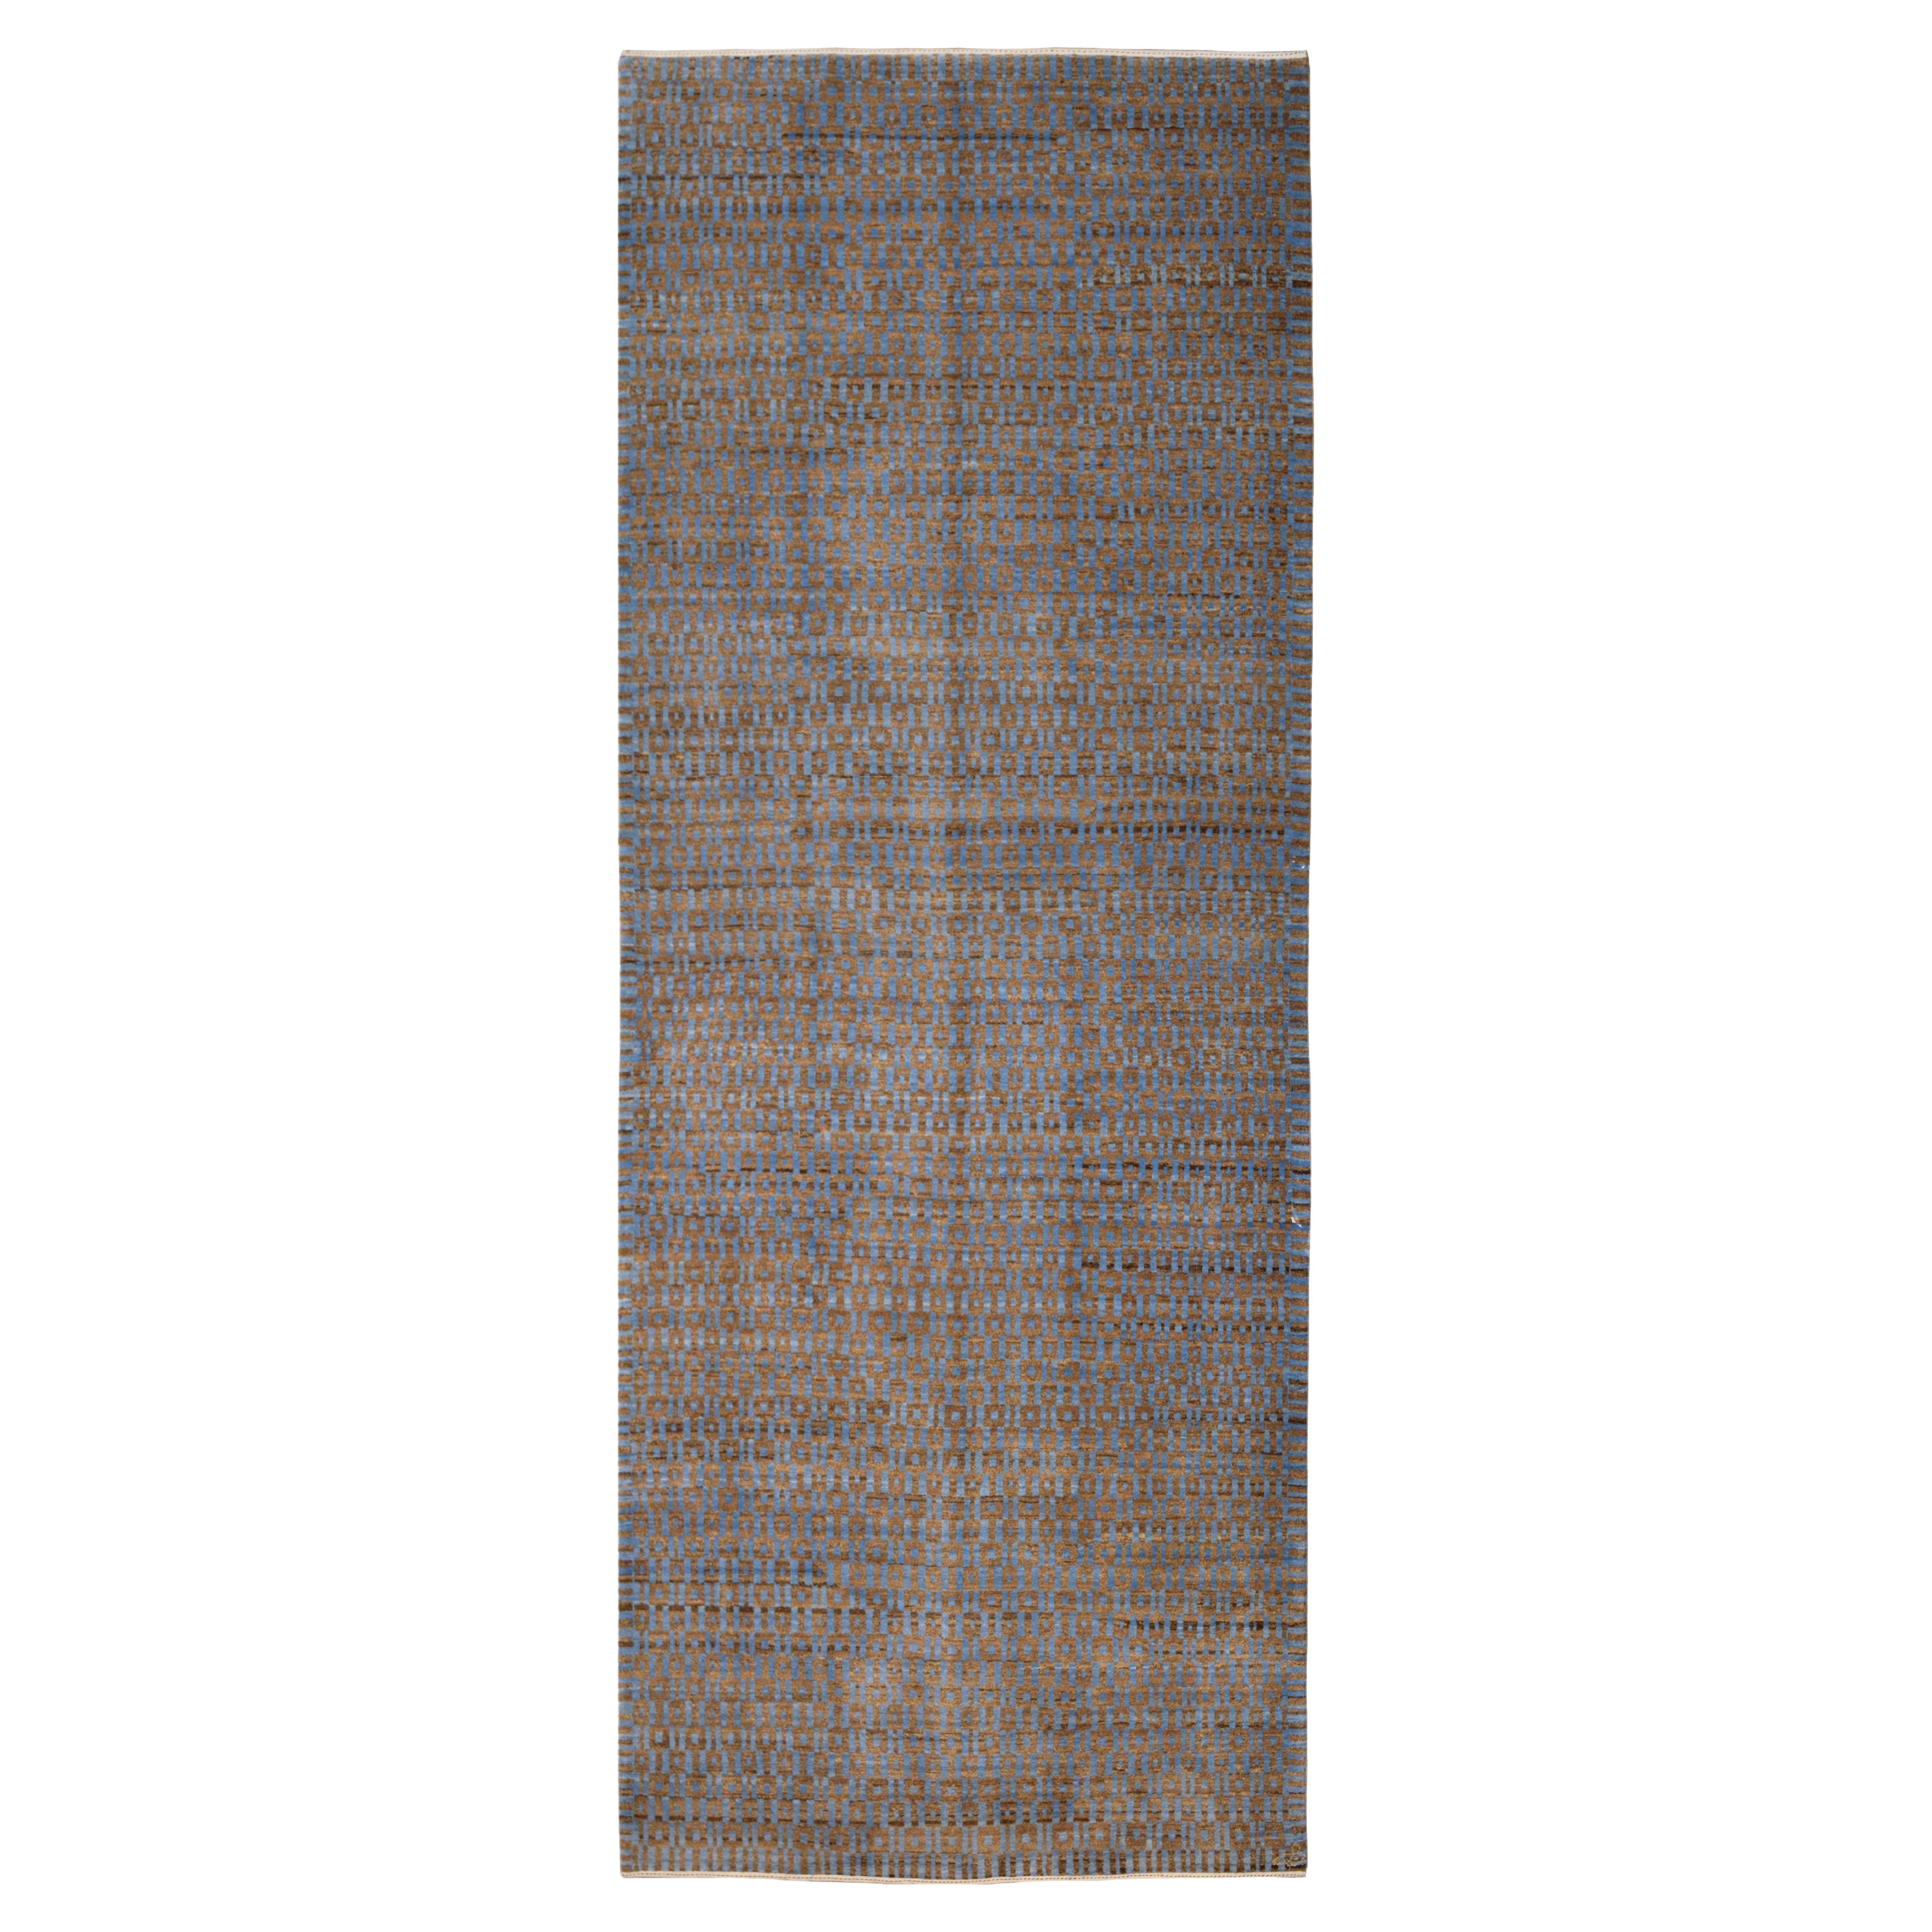 Orley Shabahng, Hand-Knotted, Art Deco Wool Persian Carpet, Blue, Brown, 5'x 12' For Sale